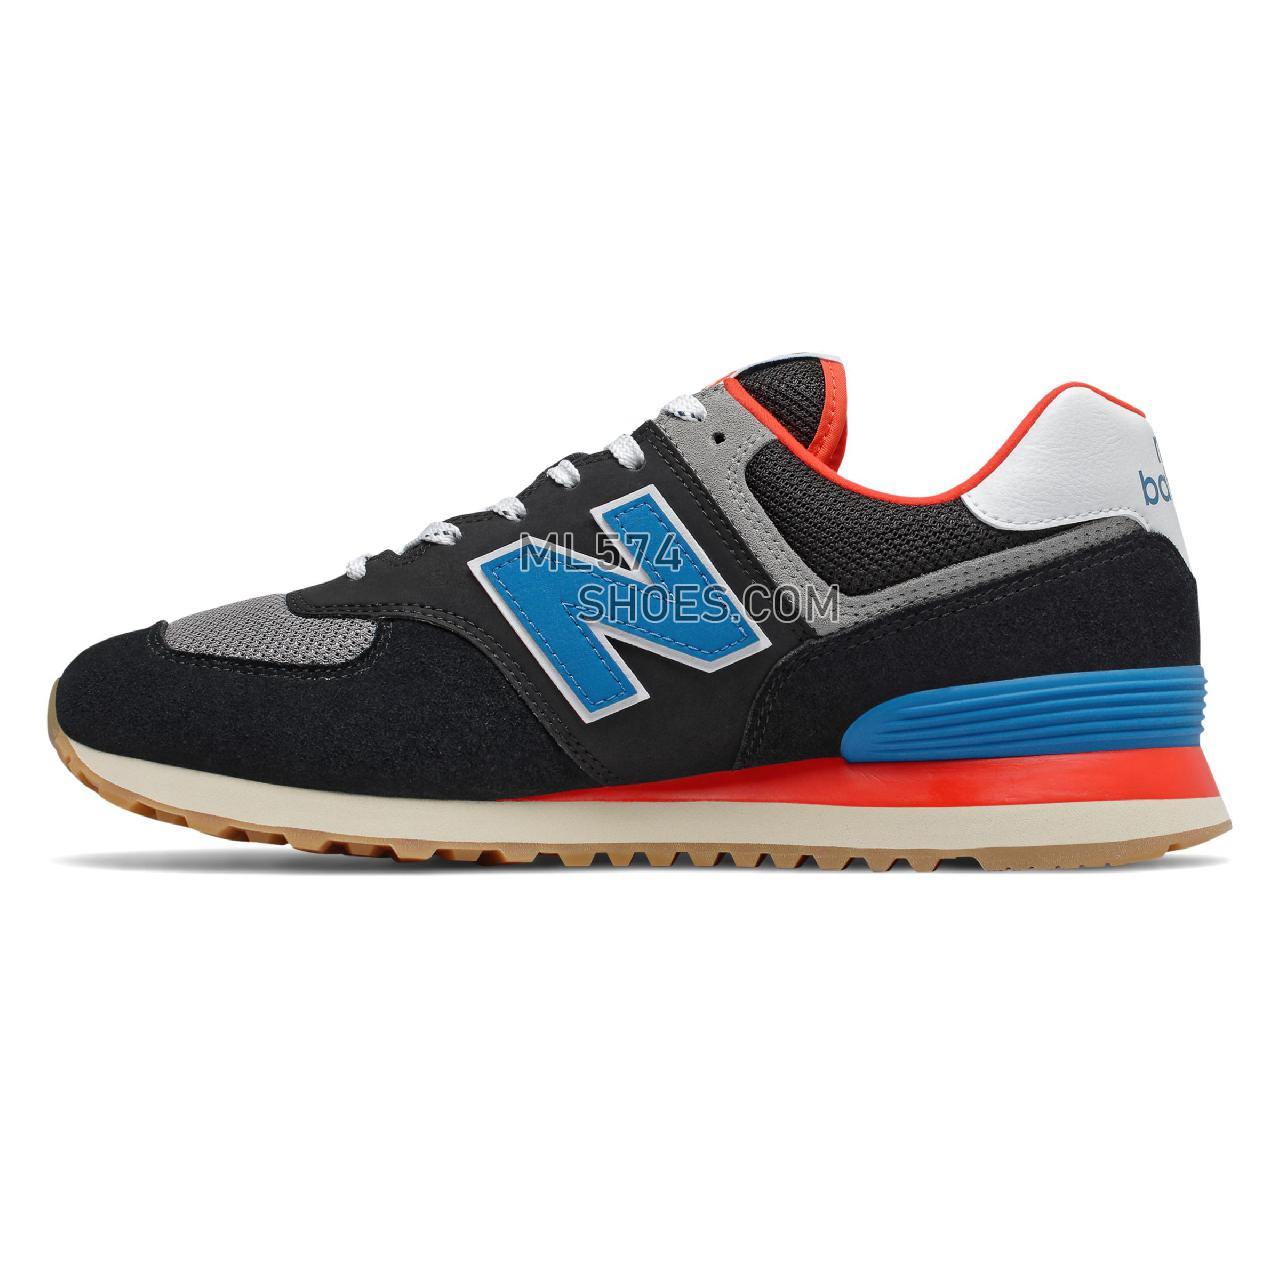 New Balance 574 - Men's Classic Sneakers - Black with Neo Classic Blue and Nebula - ML574SOV